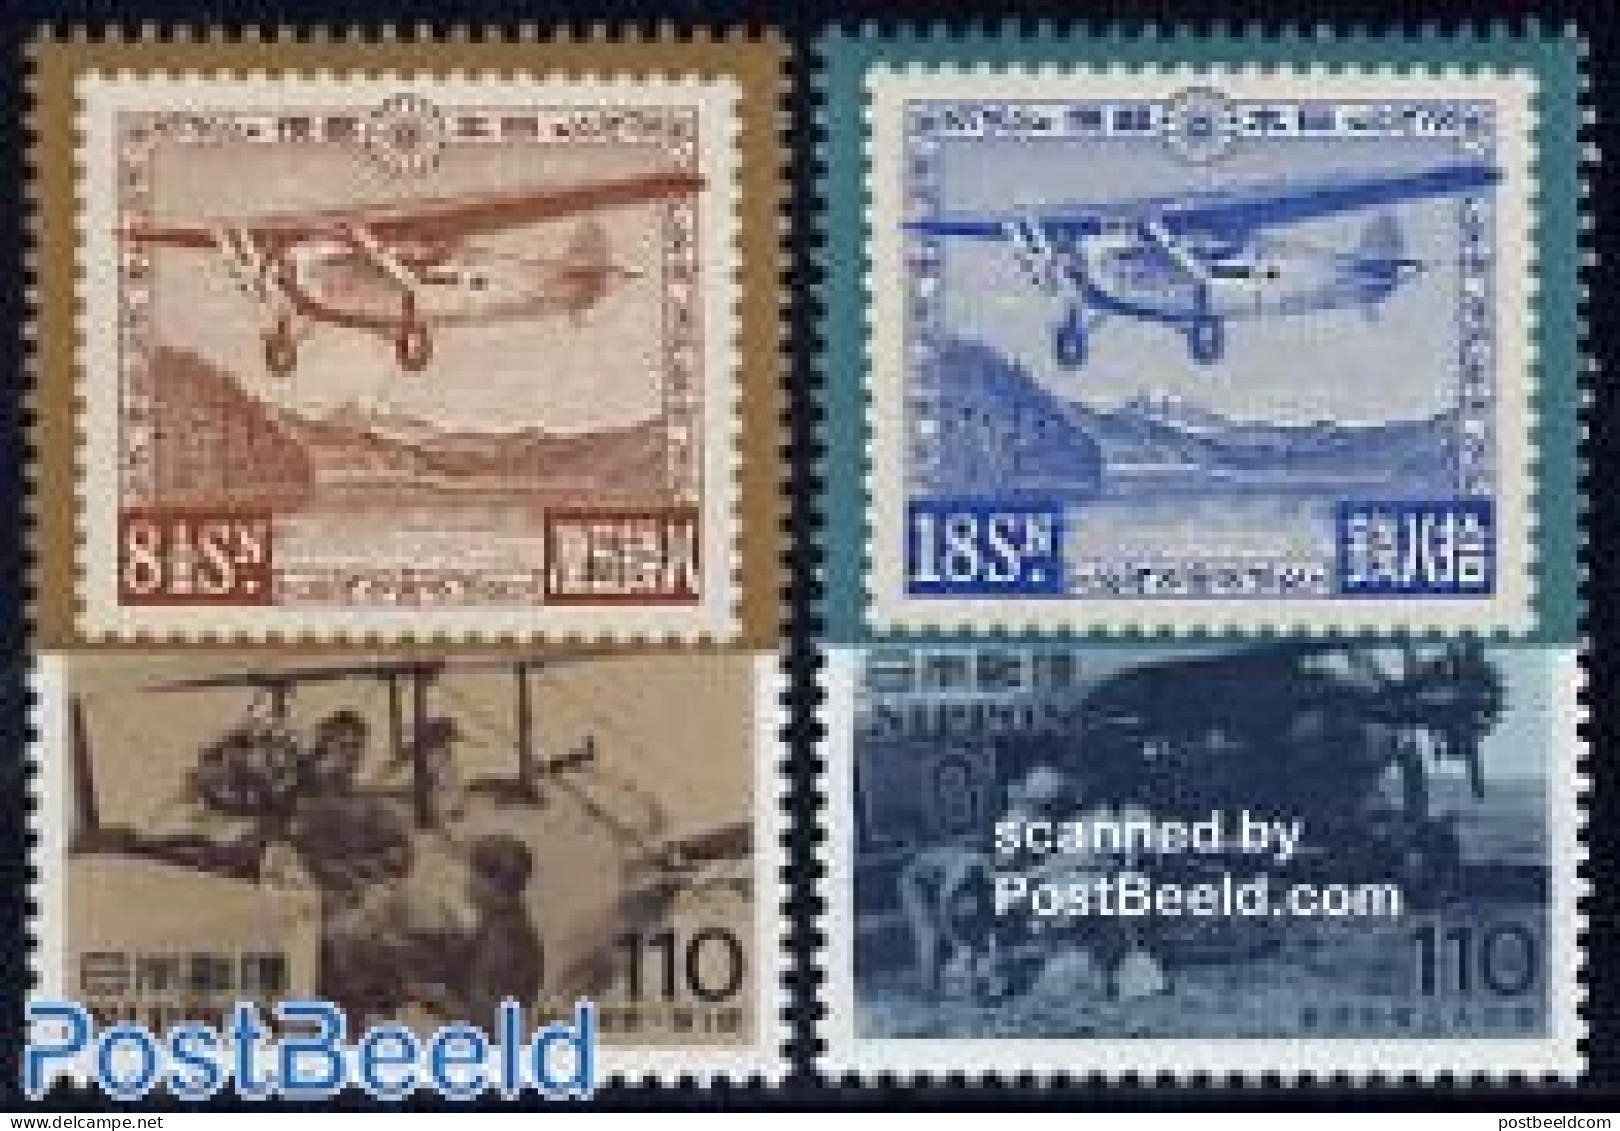 Japan 1995 Stamp History 2v, Mint NH, Transport - Post - Stamps On Stamps - Aircraft & Aviation - Neufs